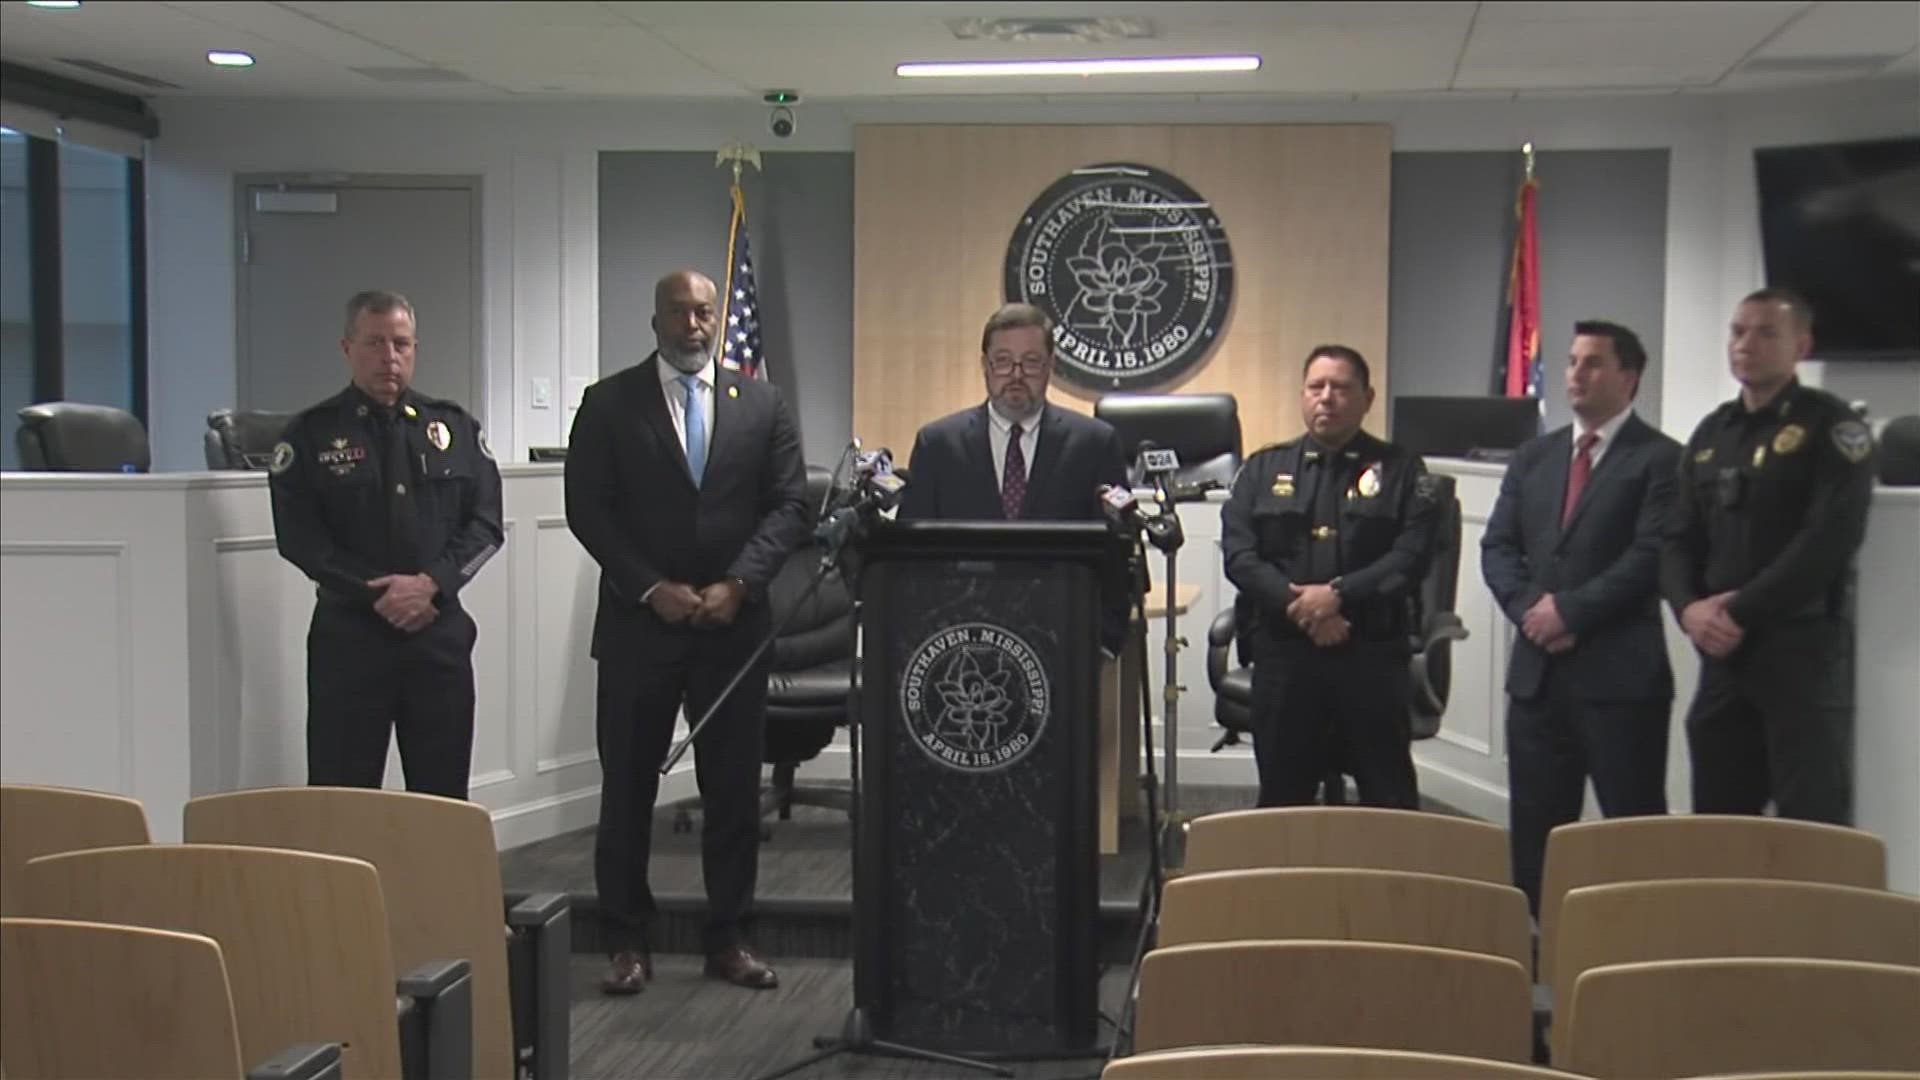 Officials said law enforcement will focus on crime categories such as business robberies, carjackings, and gun and drug-related offenses.